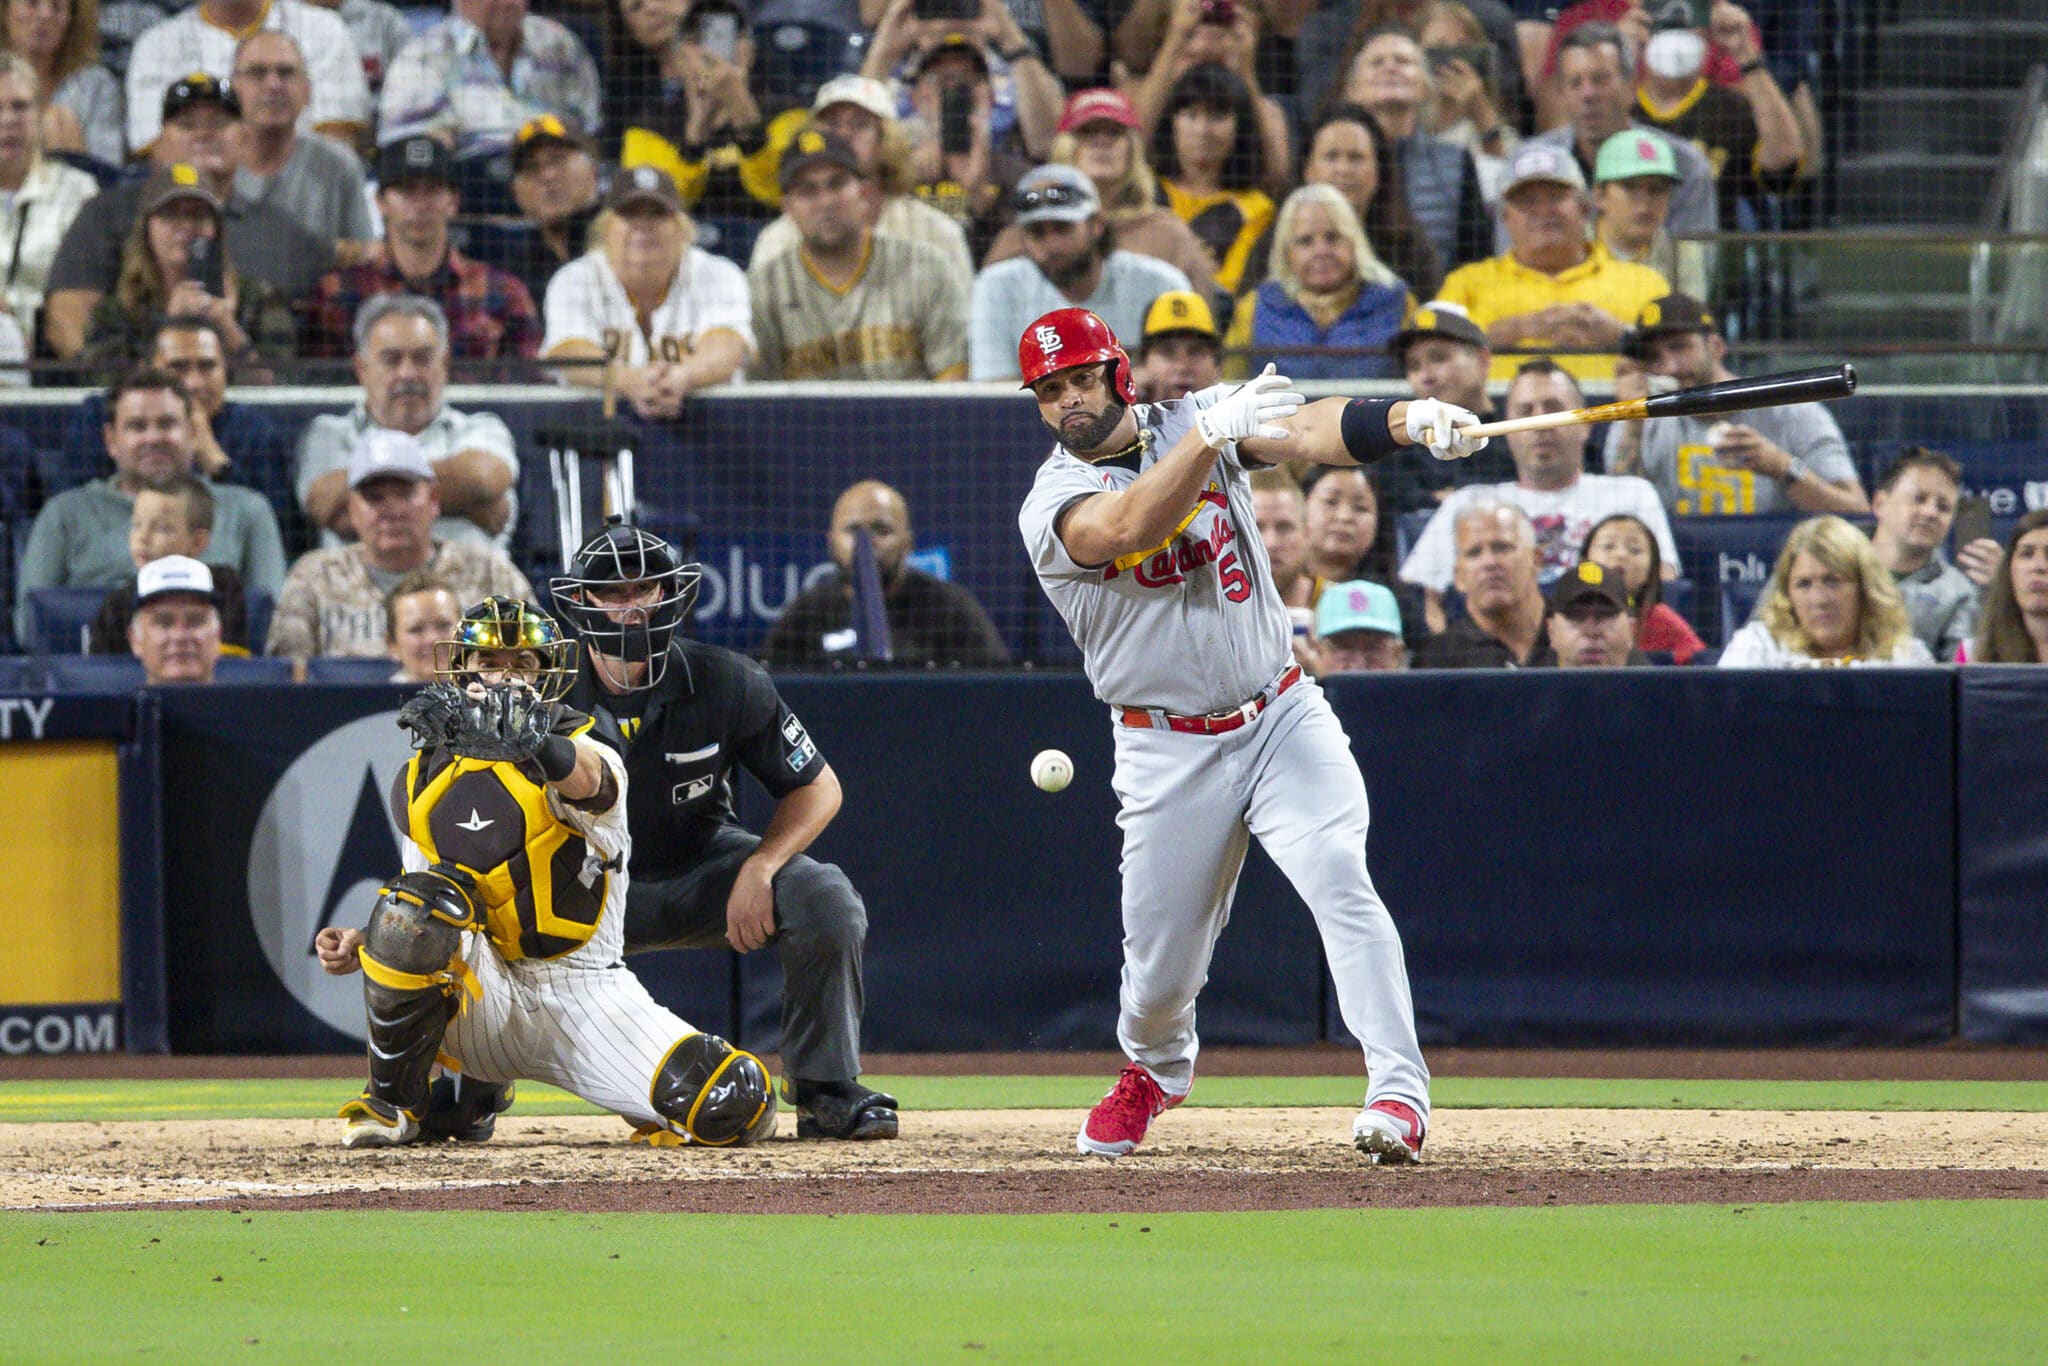 St. Louis Cardinals' Albert Pujols watches a ball hit for a single during the seventh inning of the team's baseball game against the San Diego Padres, Wednesday, Sept. 21, 2022, in San Diego. (AP Photo/Brandon Sloter)